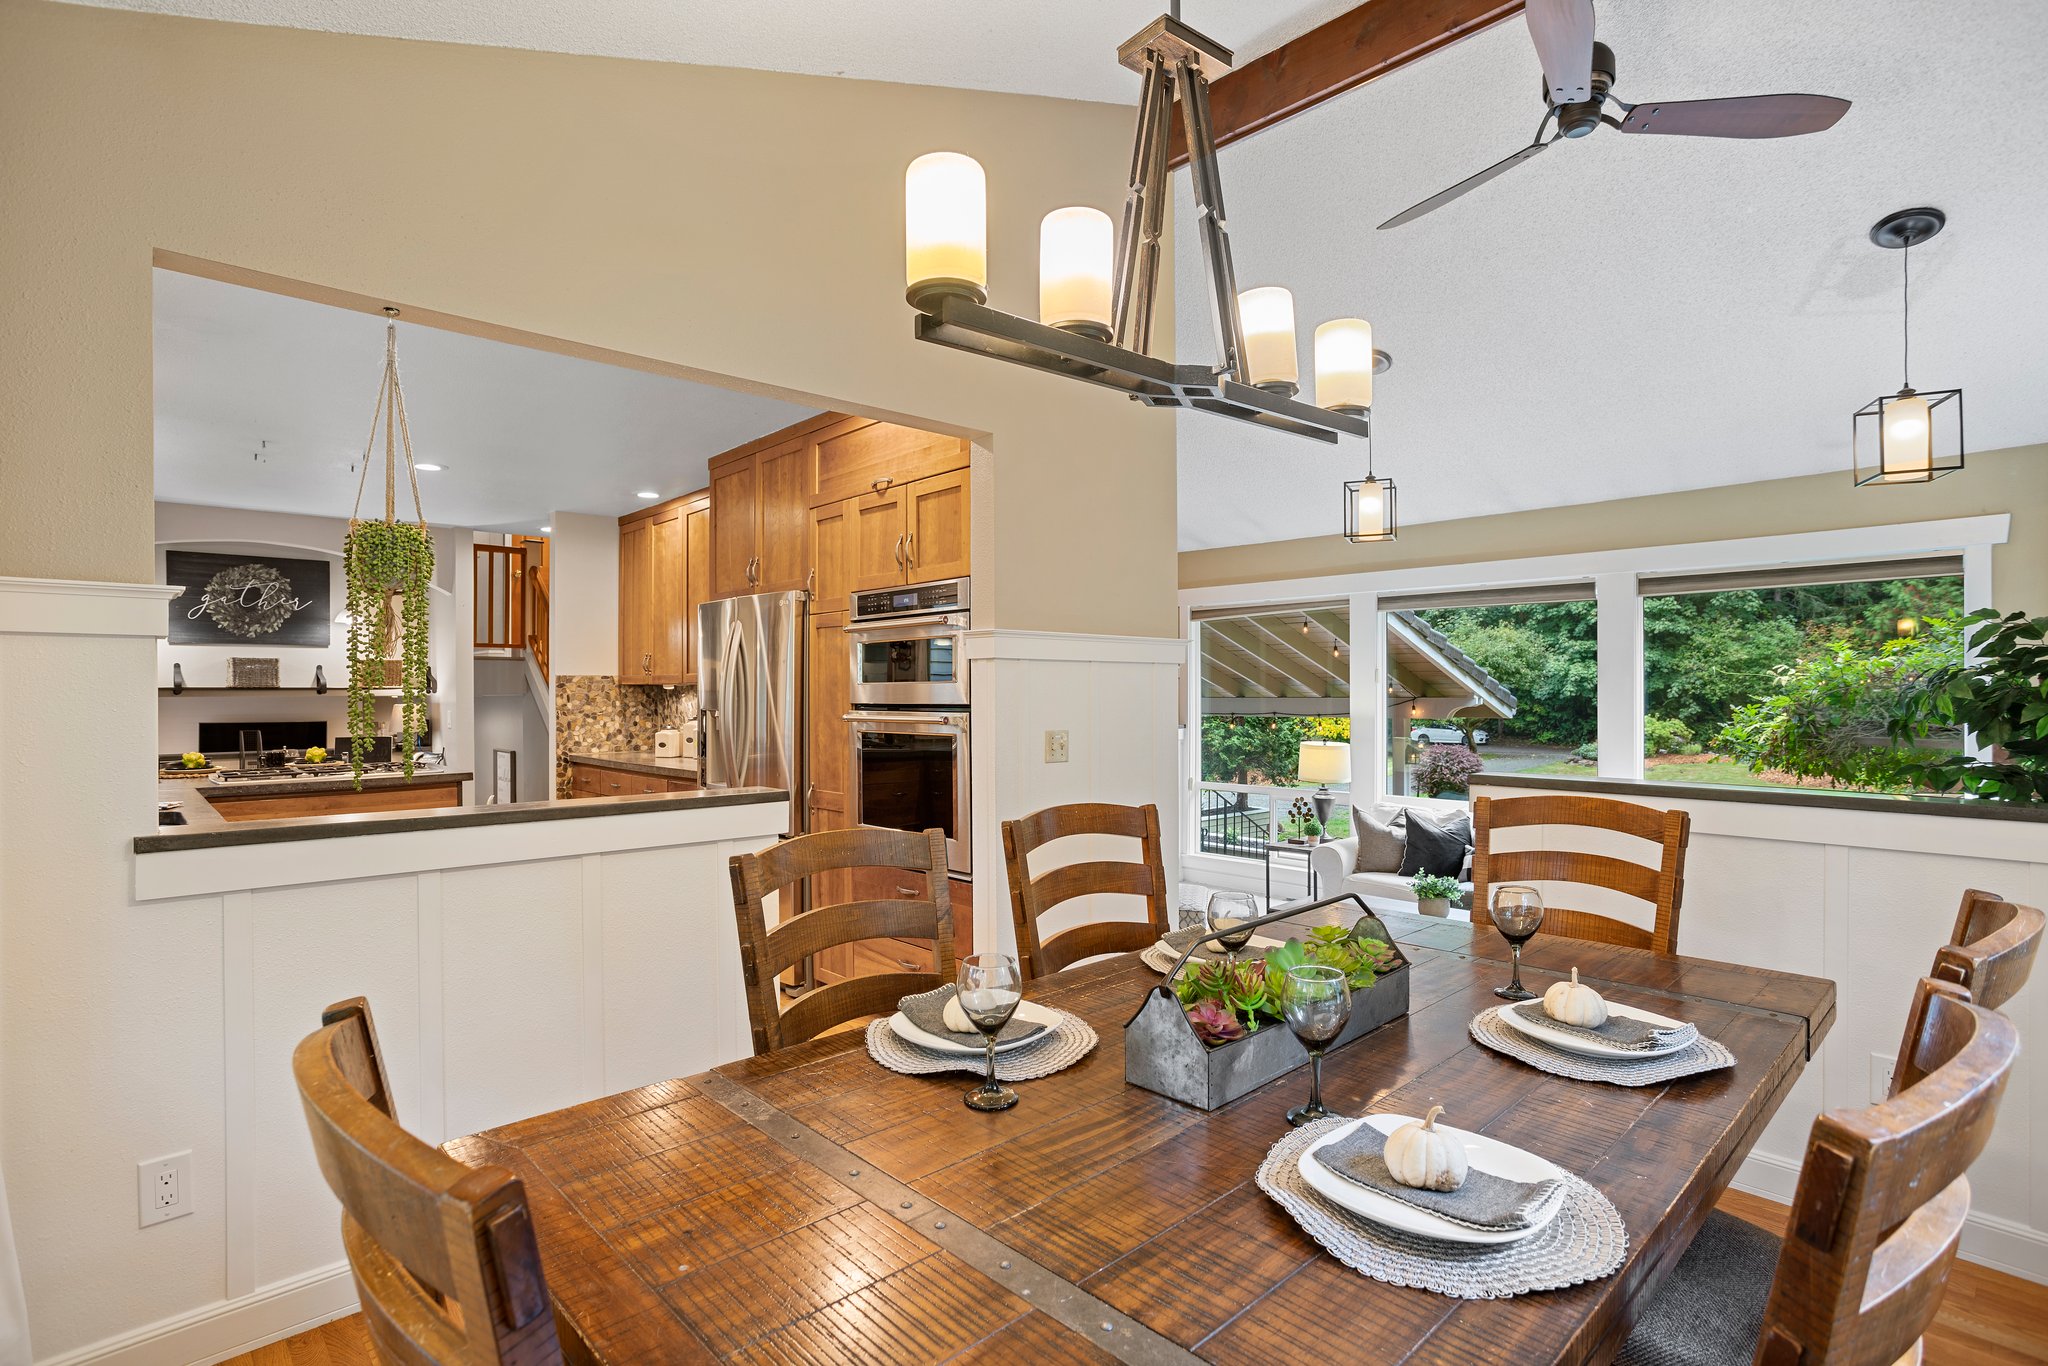 Dining room flows smoothly into the kitchen, great for entertaining!